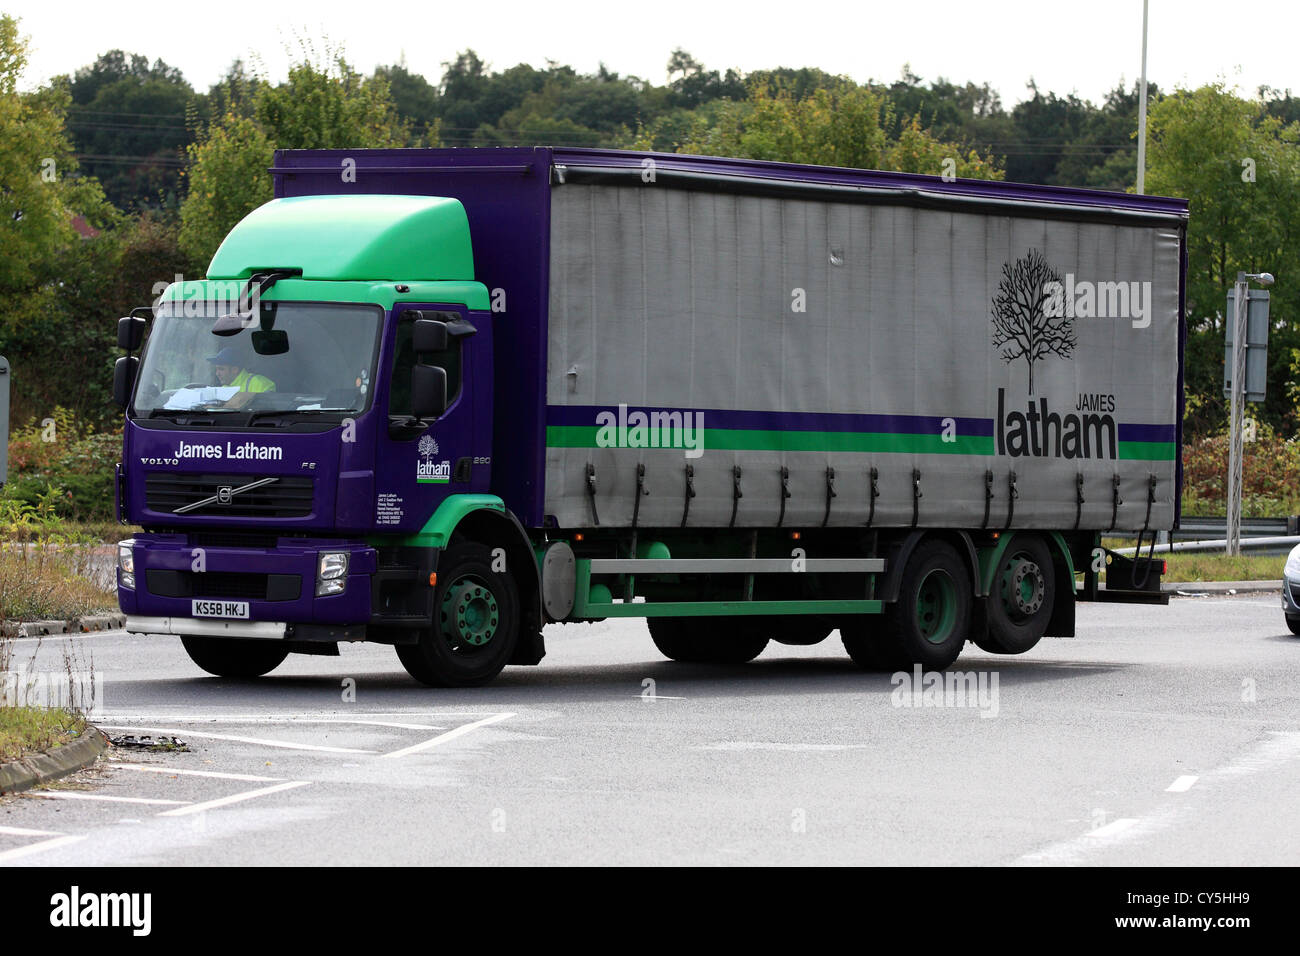 An ' truck traveling along a road in London, England Stock Photo